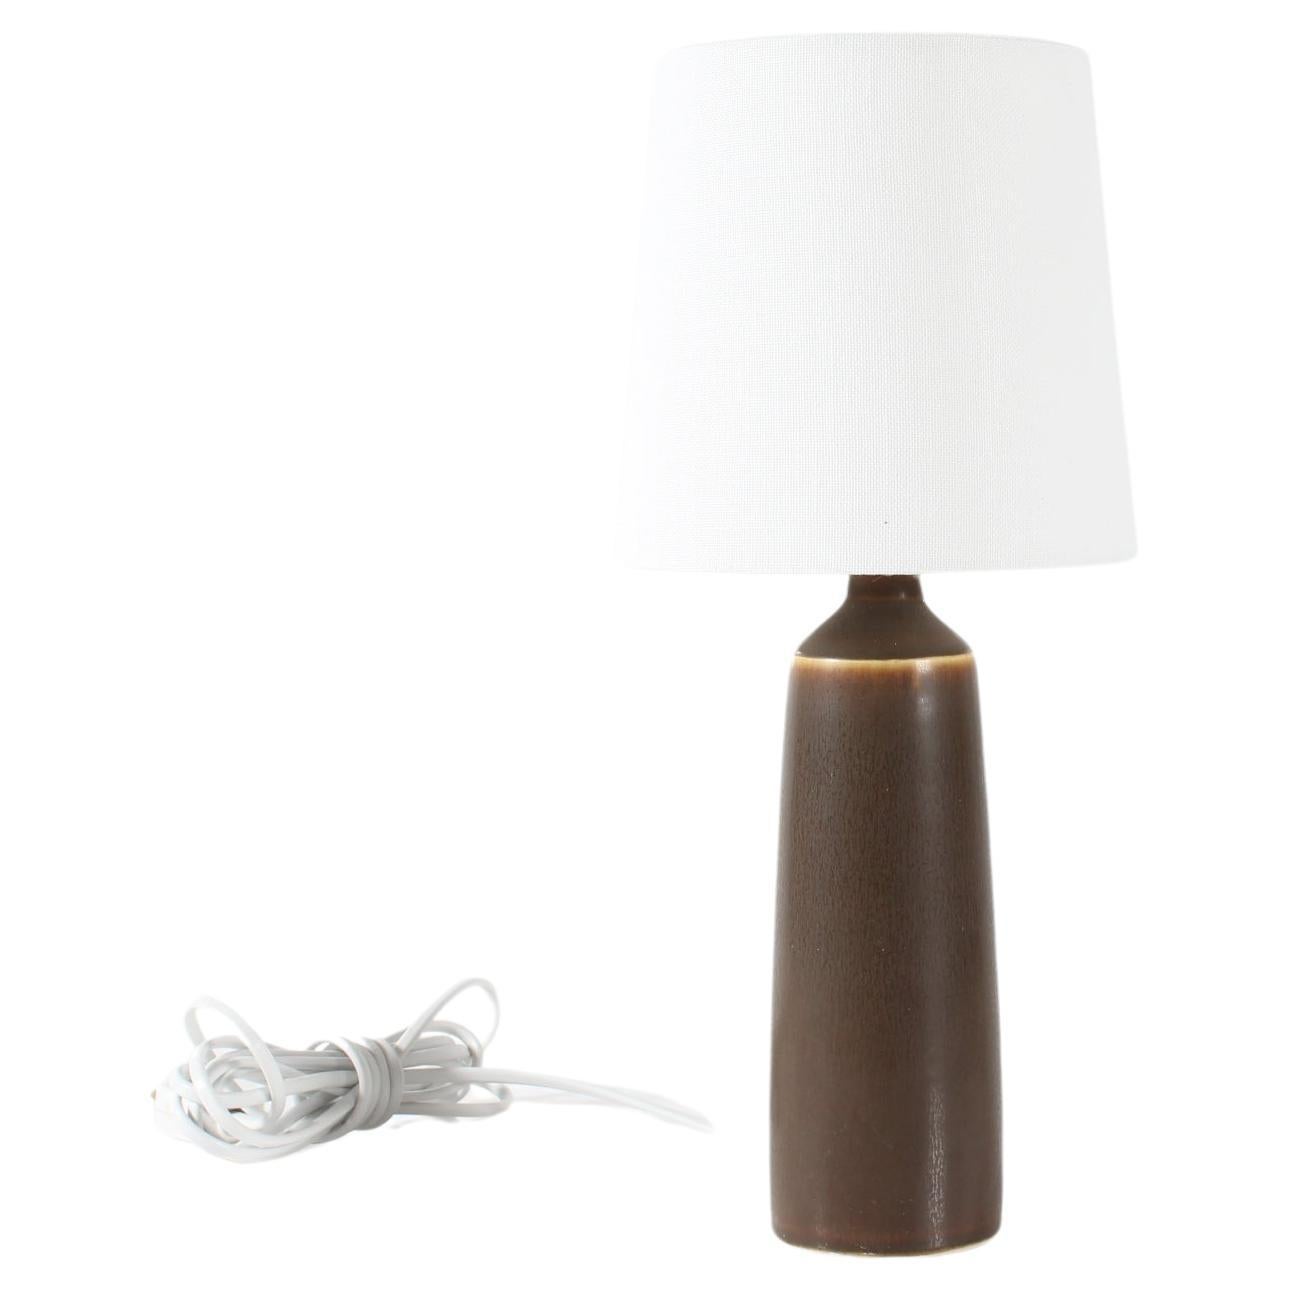 Small Danish table- and bedside lamp made by the  ceramic workshop Palshus.
The lamp is designed by Per Linnemann-Schmidt and manufactured circa 1950s or early 1960s.

The lamp base is decorated with a smooth brown hare´s fur glaze with notes of